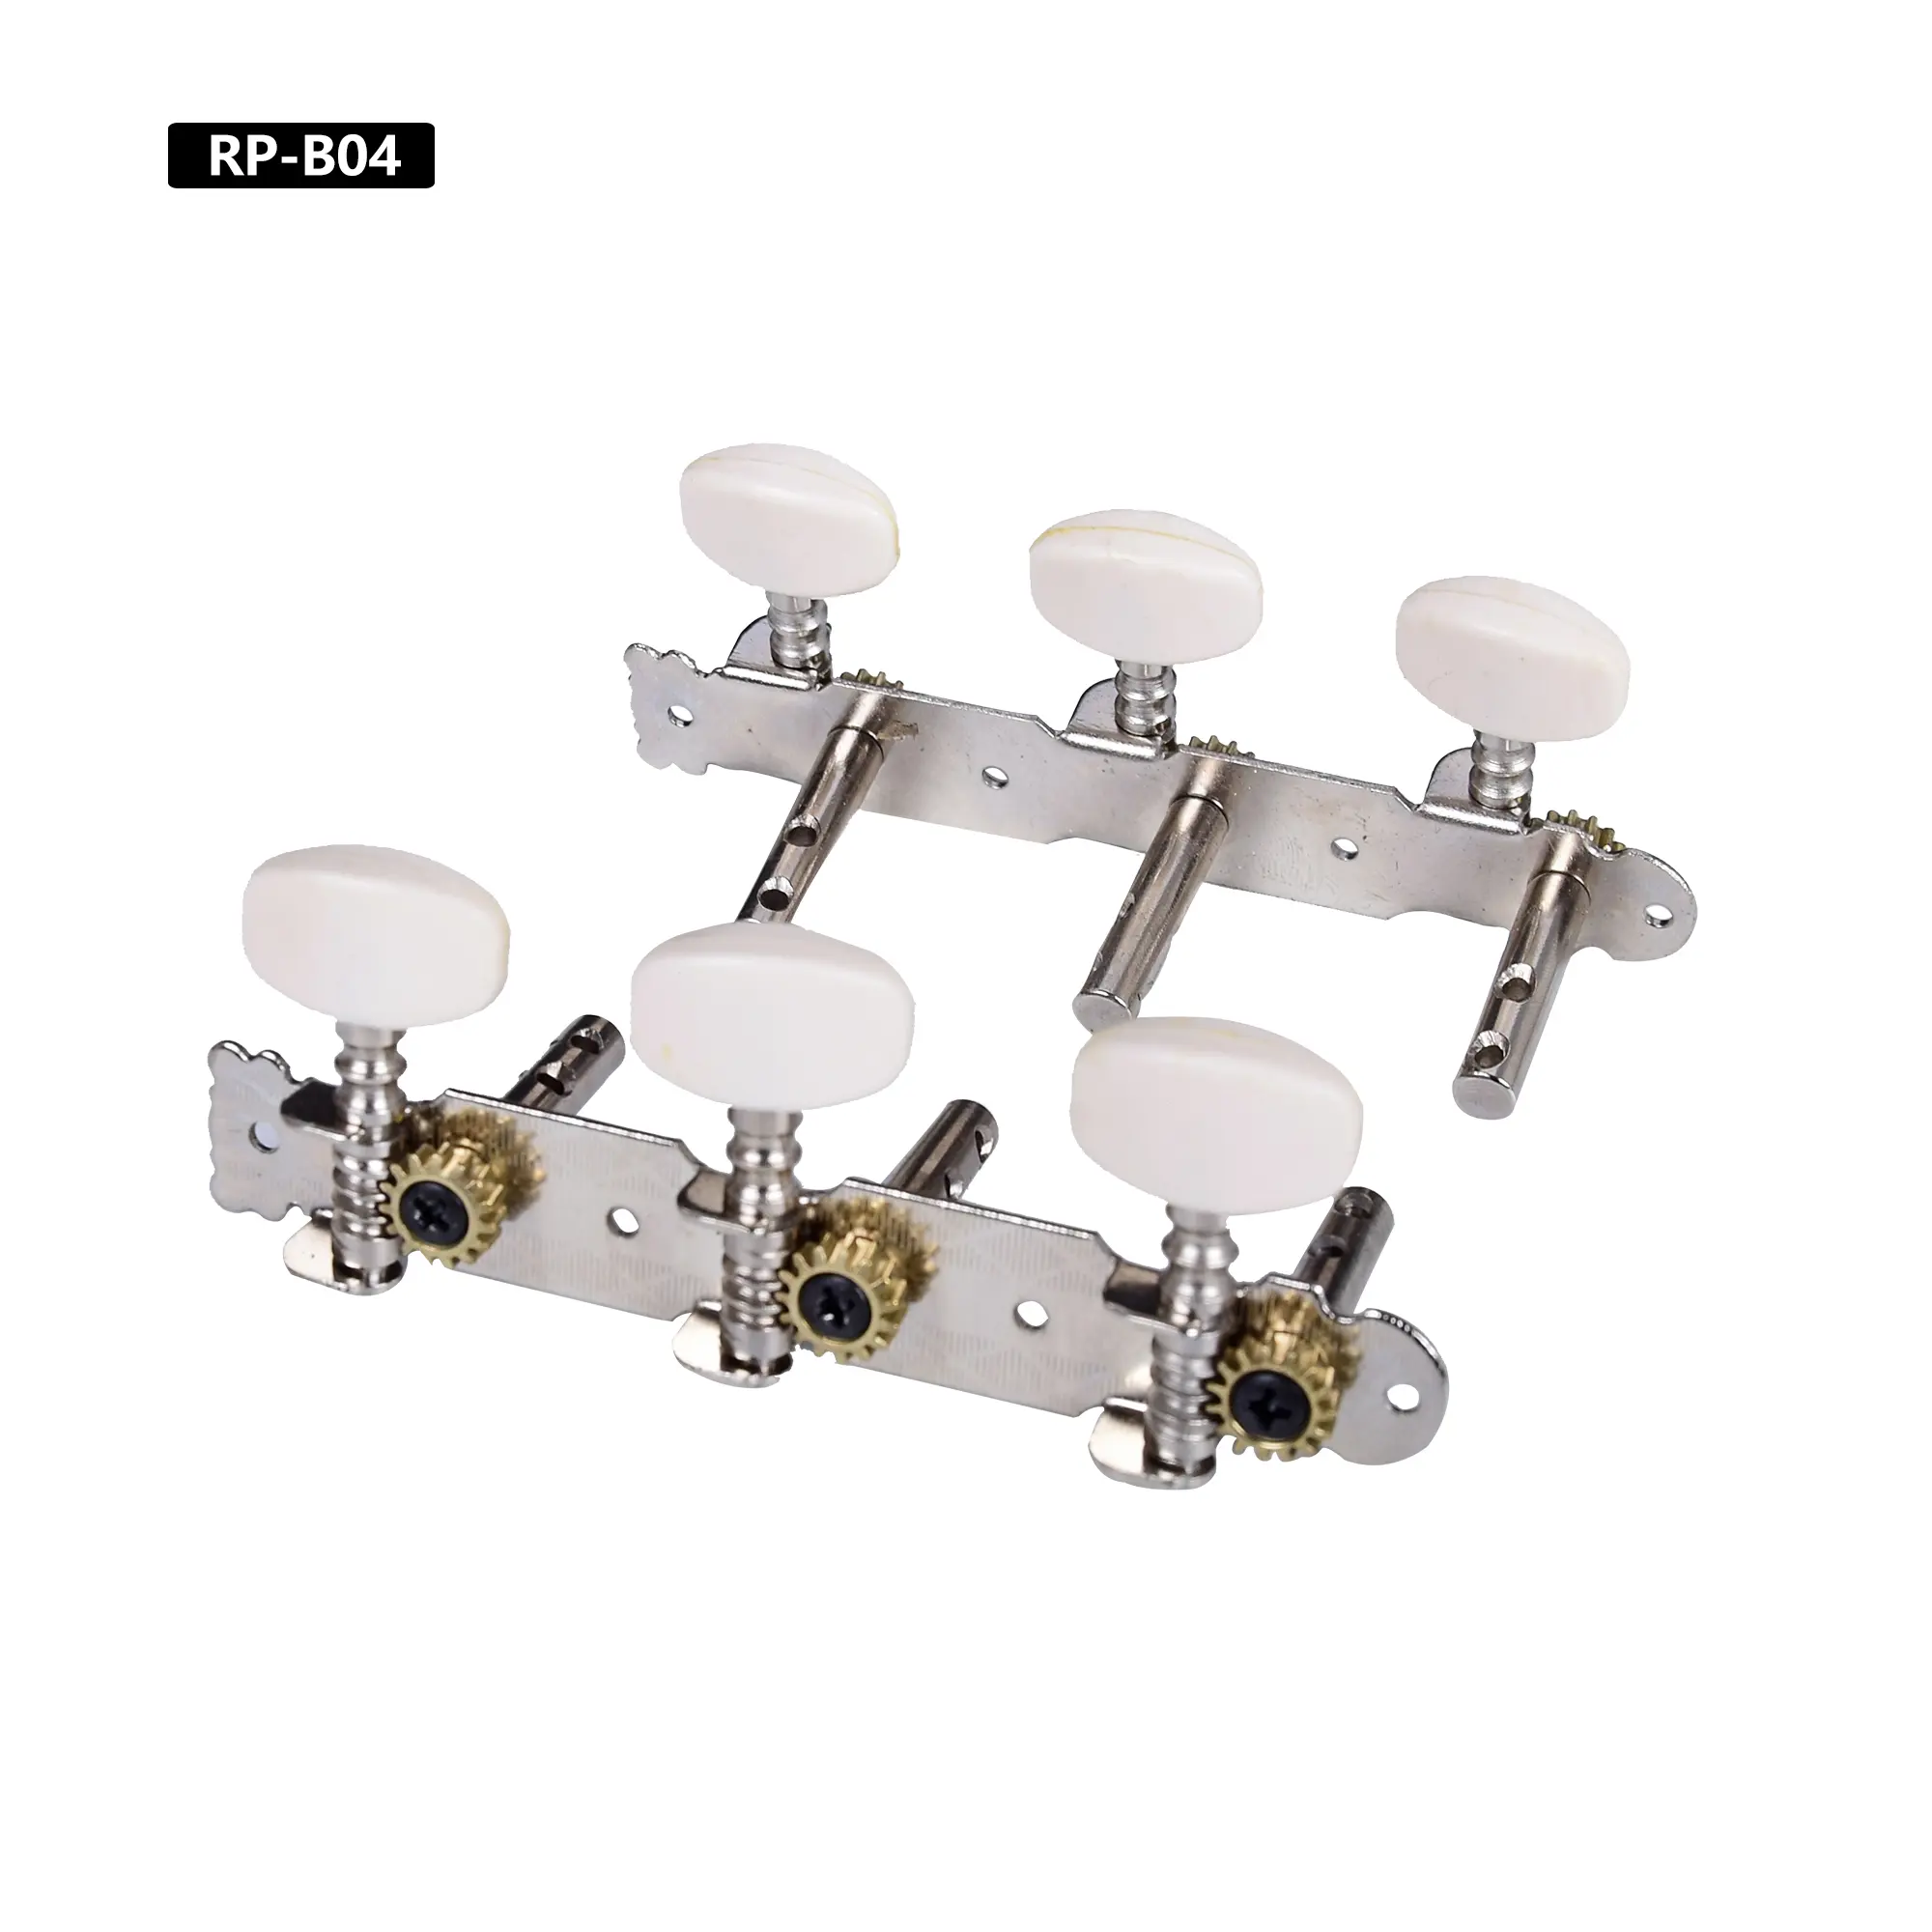 Gidoo Music Guitar Acoustic Guitar String Tuning Pegs Machine Heads Part Accessories